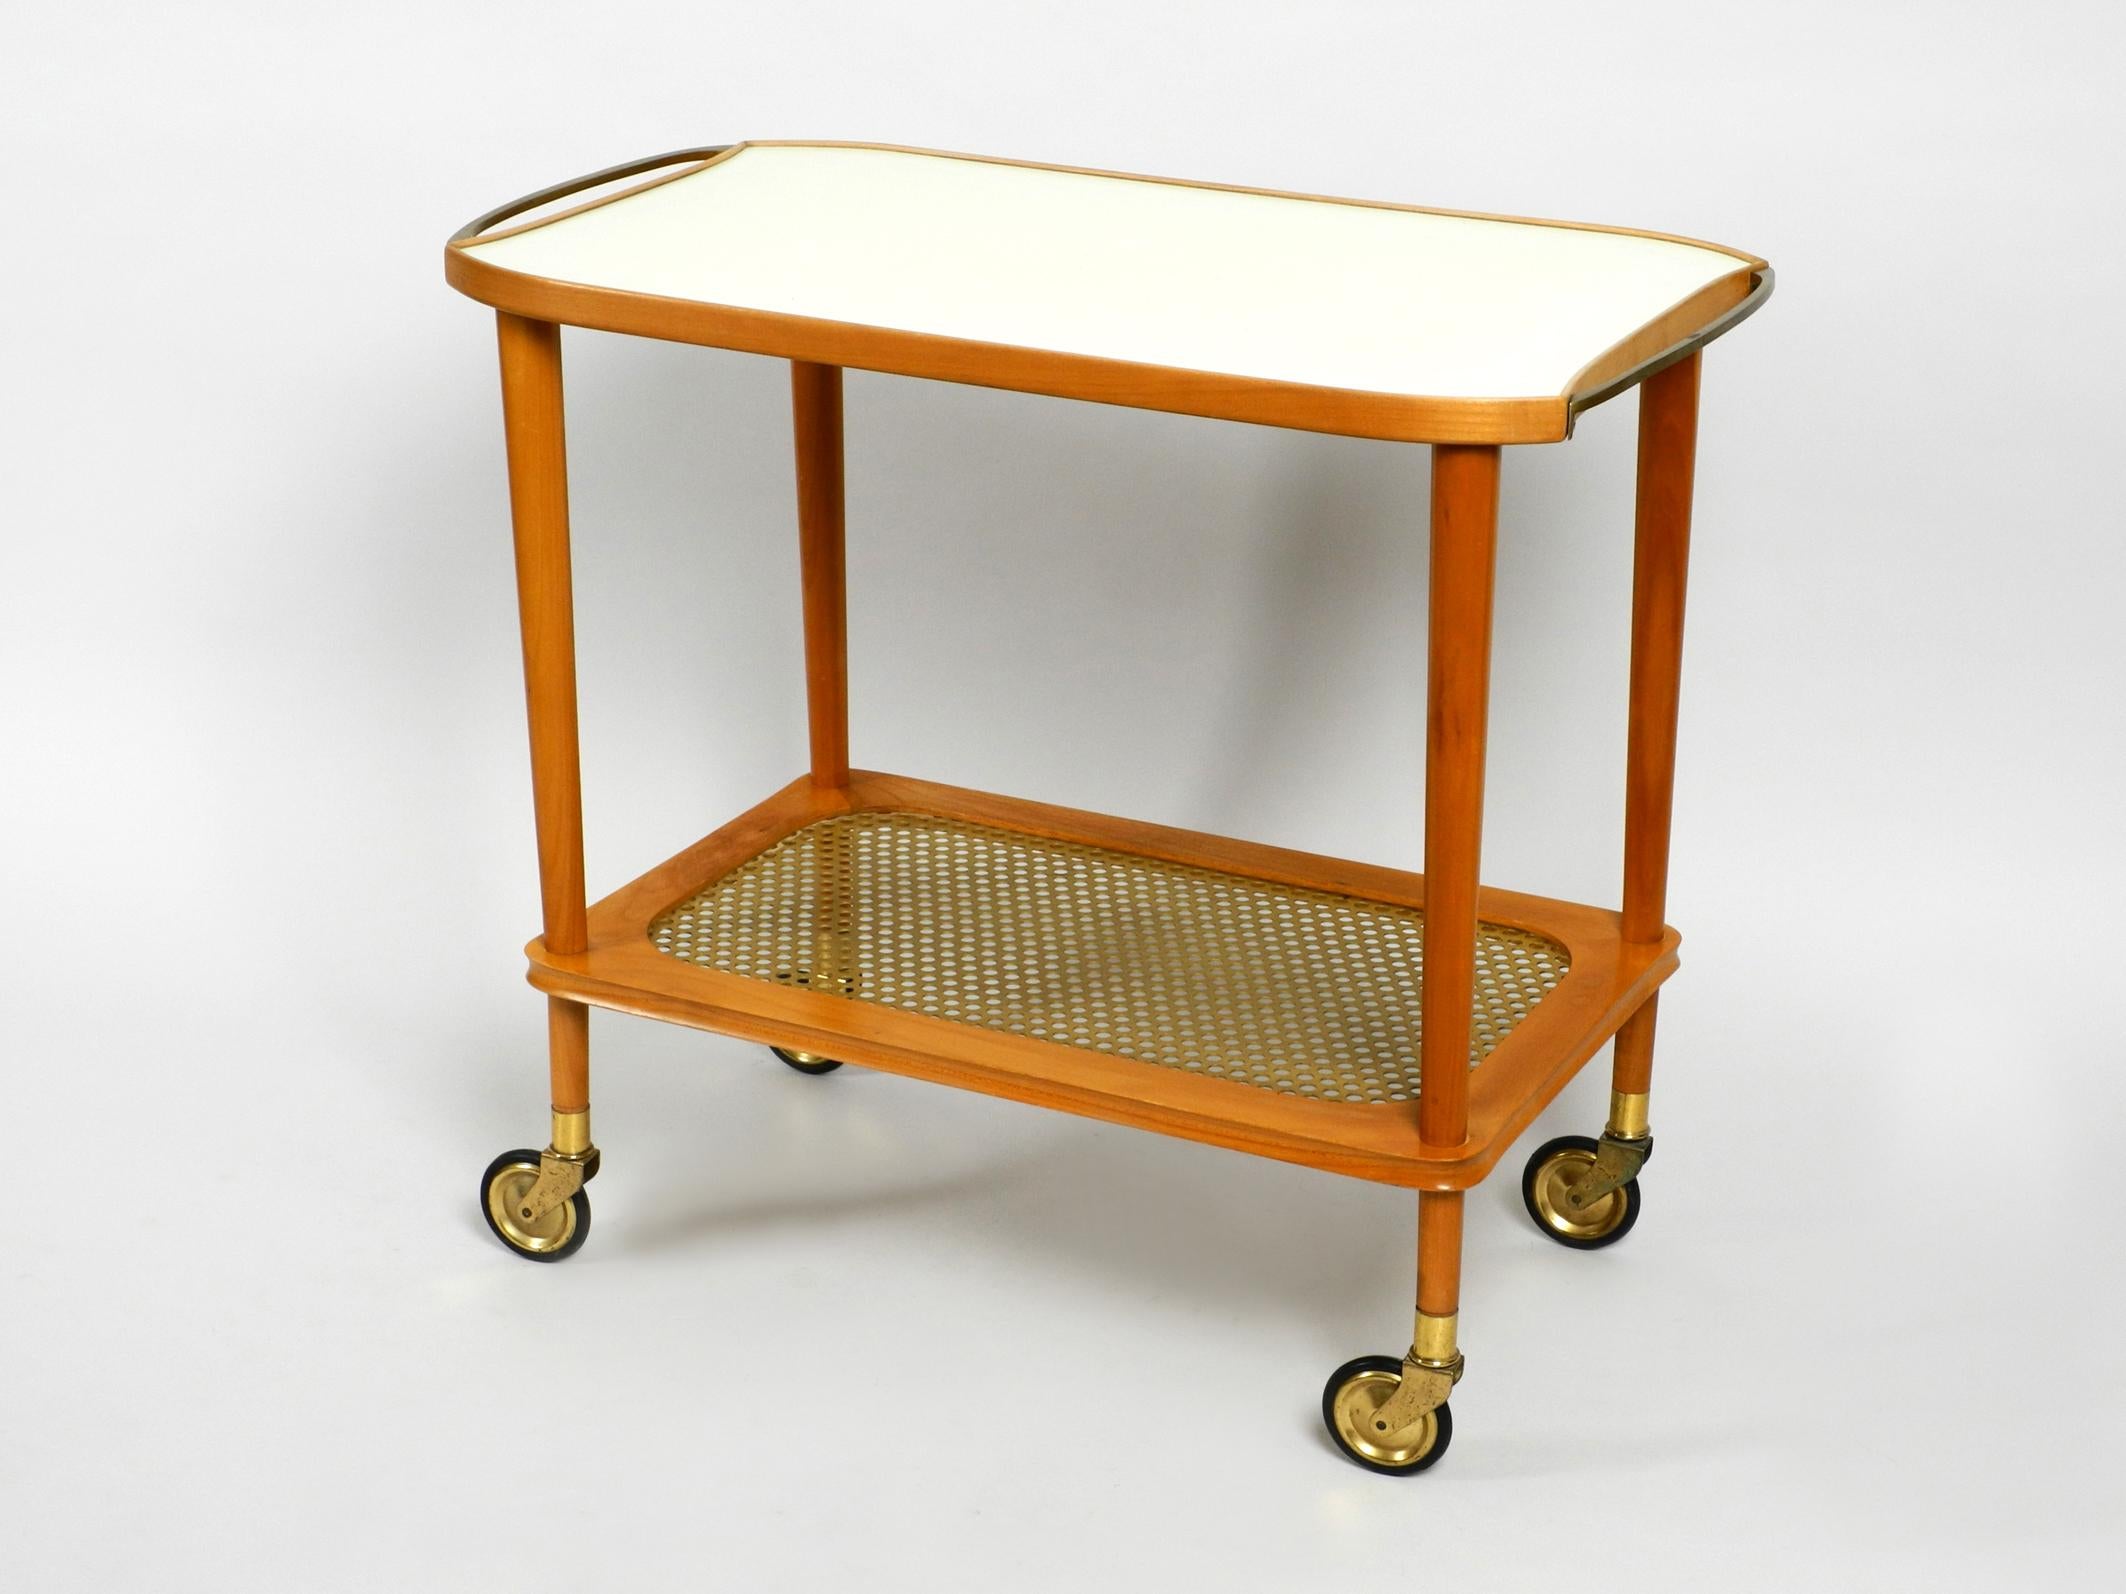 Very rare beautiful Mid-Century Modern serving cart made of solid walnut wood.
From a German or Austrian production.
Lower perforated metal shelf and handles are made of brass.
Shelf is made of light beige Formica.
The serving trolley is in good